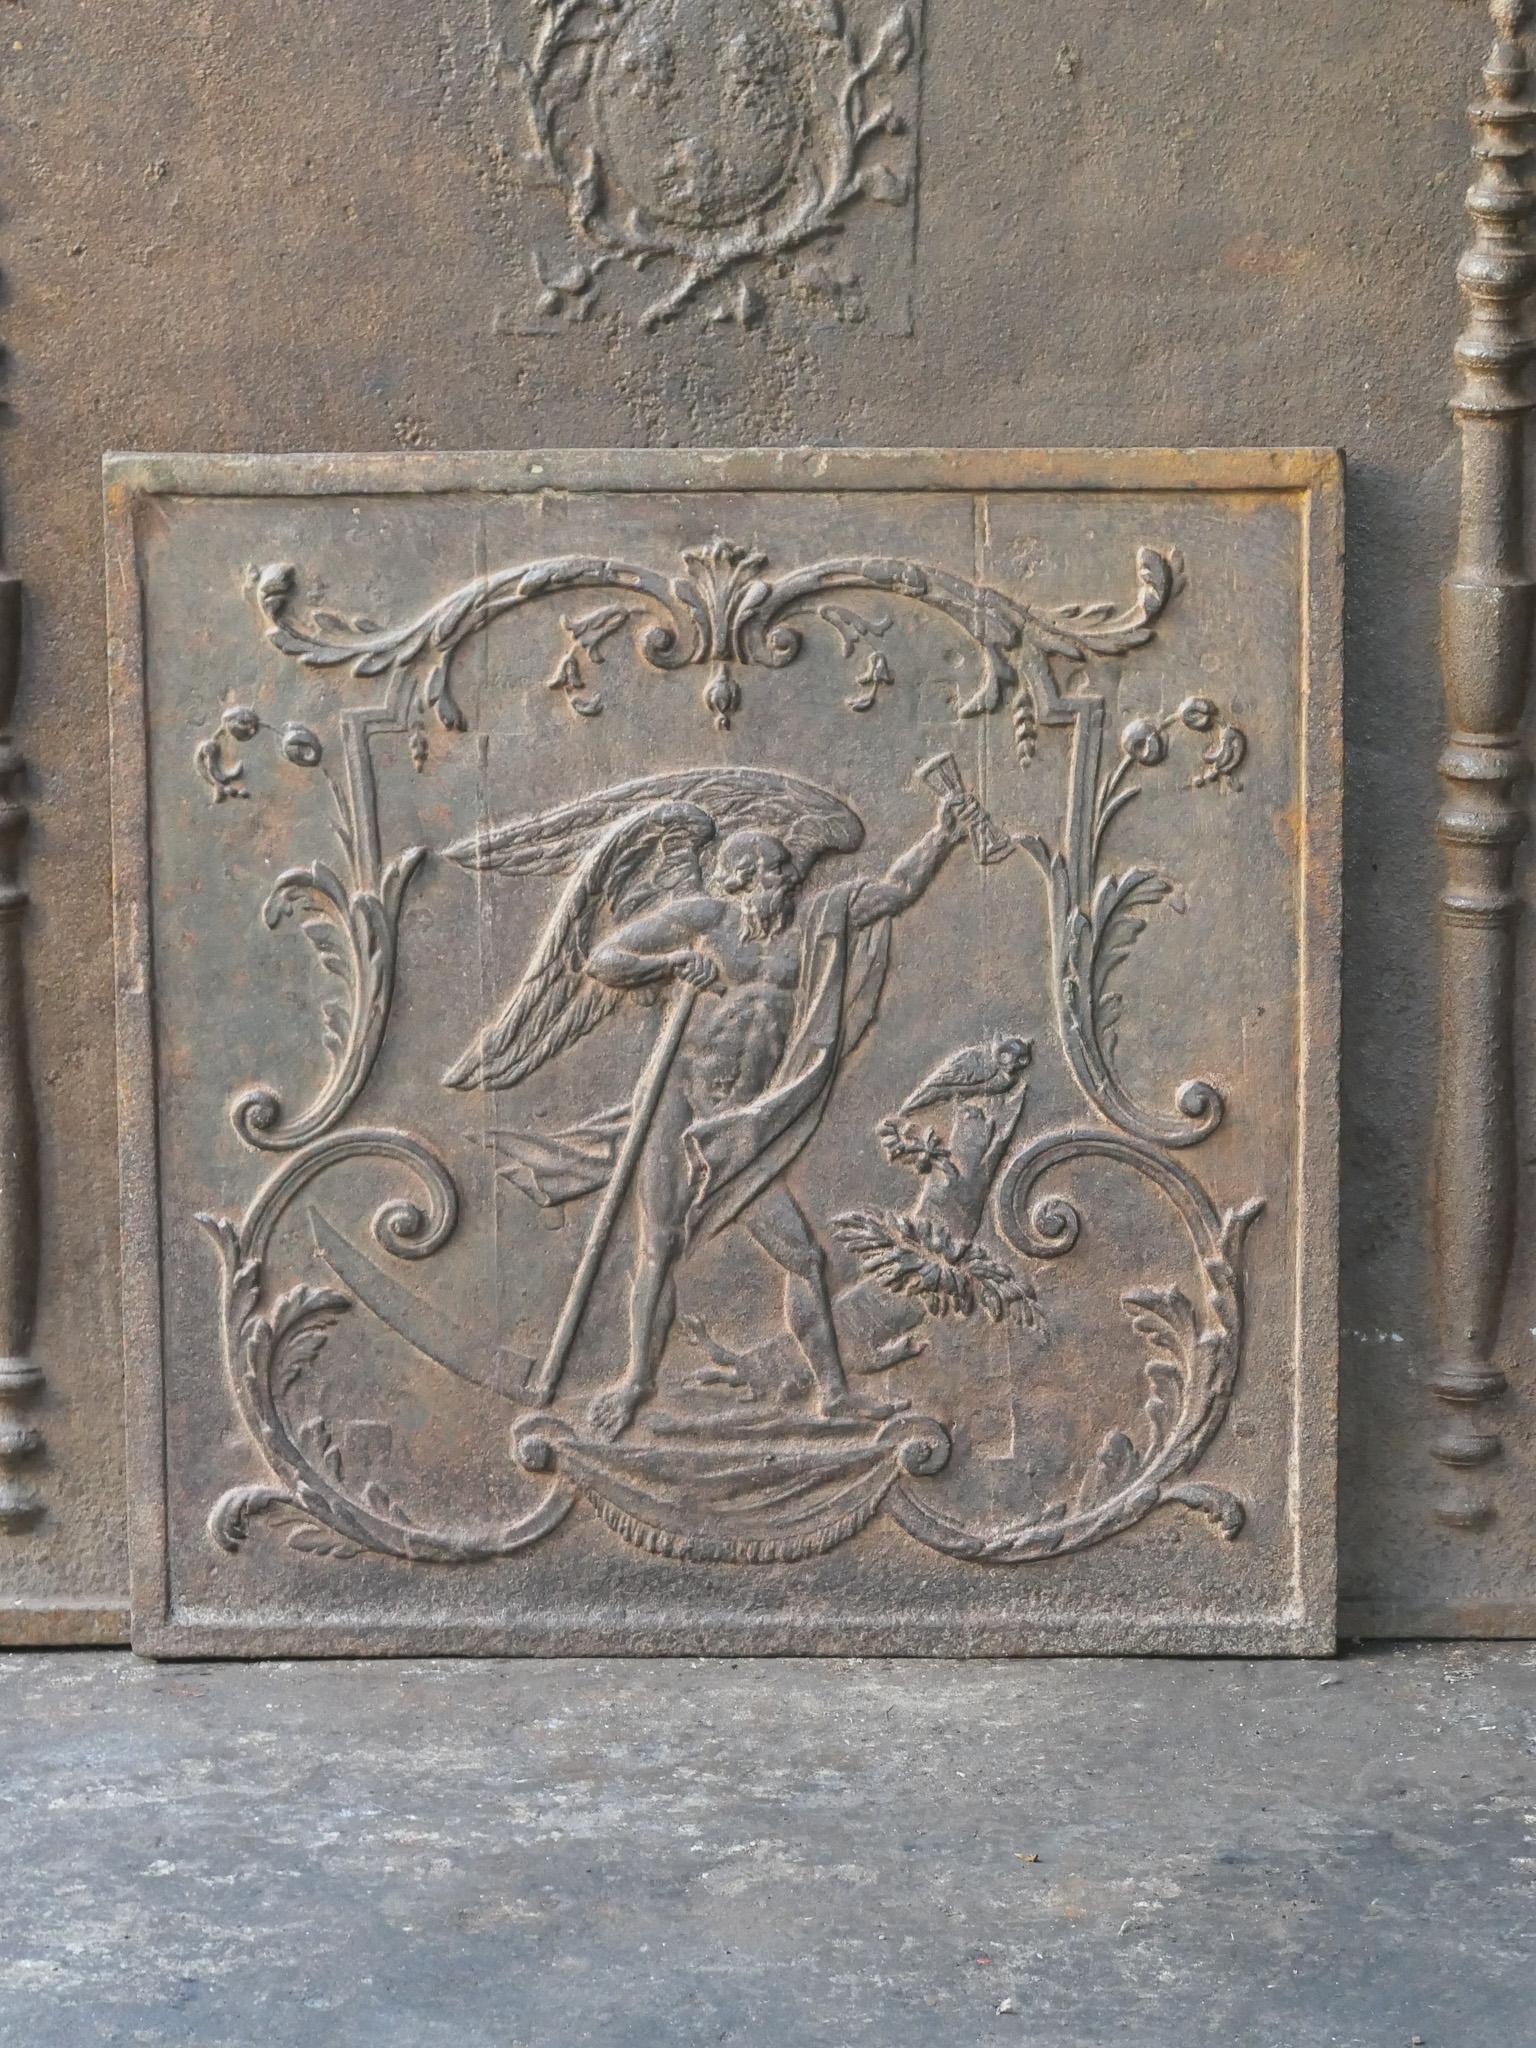 Late 18th or early 19th Century Neoclassical period French fire back with the time. The time, an old man with a scythe, symbol of the ephemeral character of life.

The fireback is made of cast iron and has a natural brown patina. Upon request it can